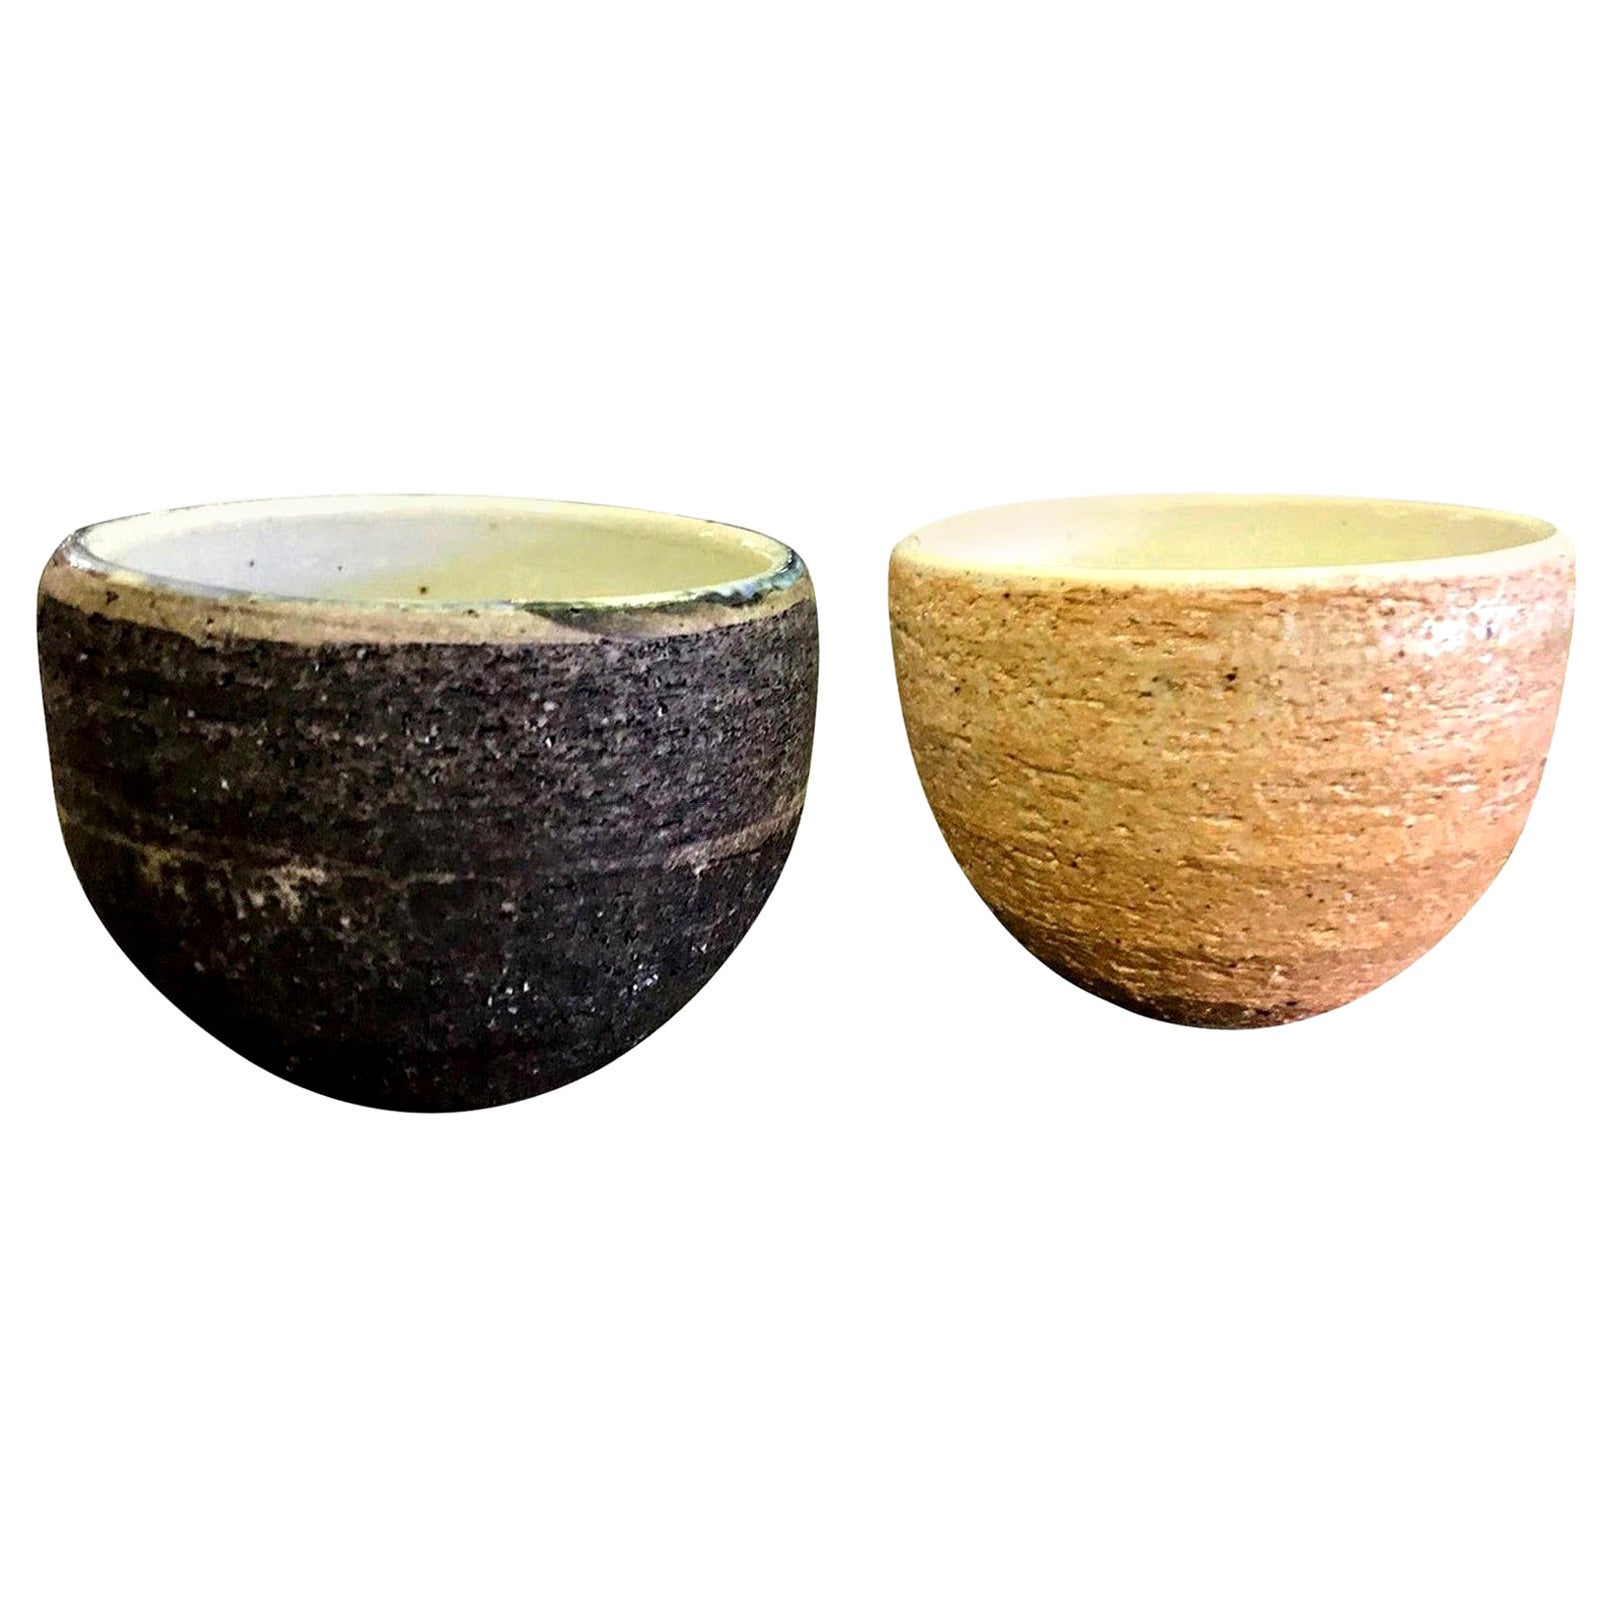 Japanese Handmade Ceramic Pottery Textured Tea Ceremony Cup For Sale